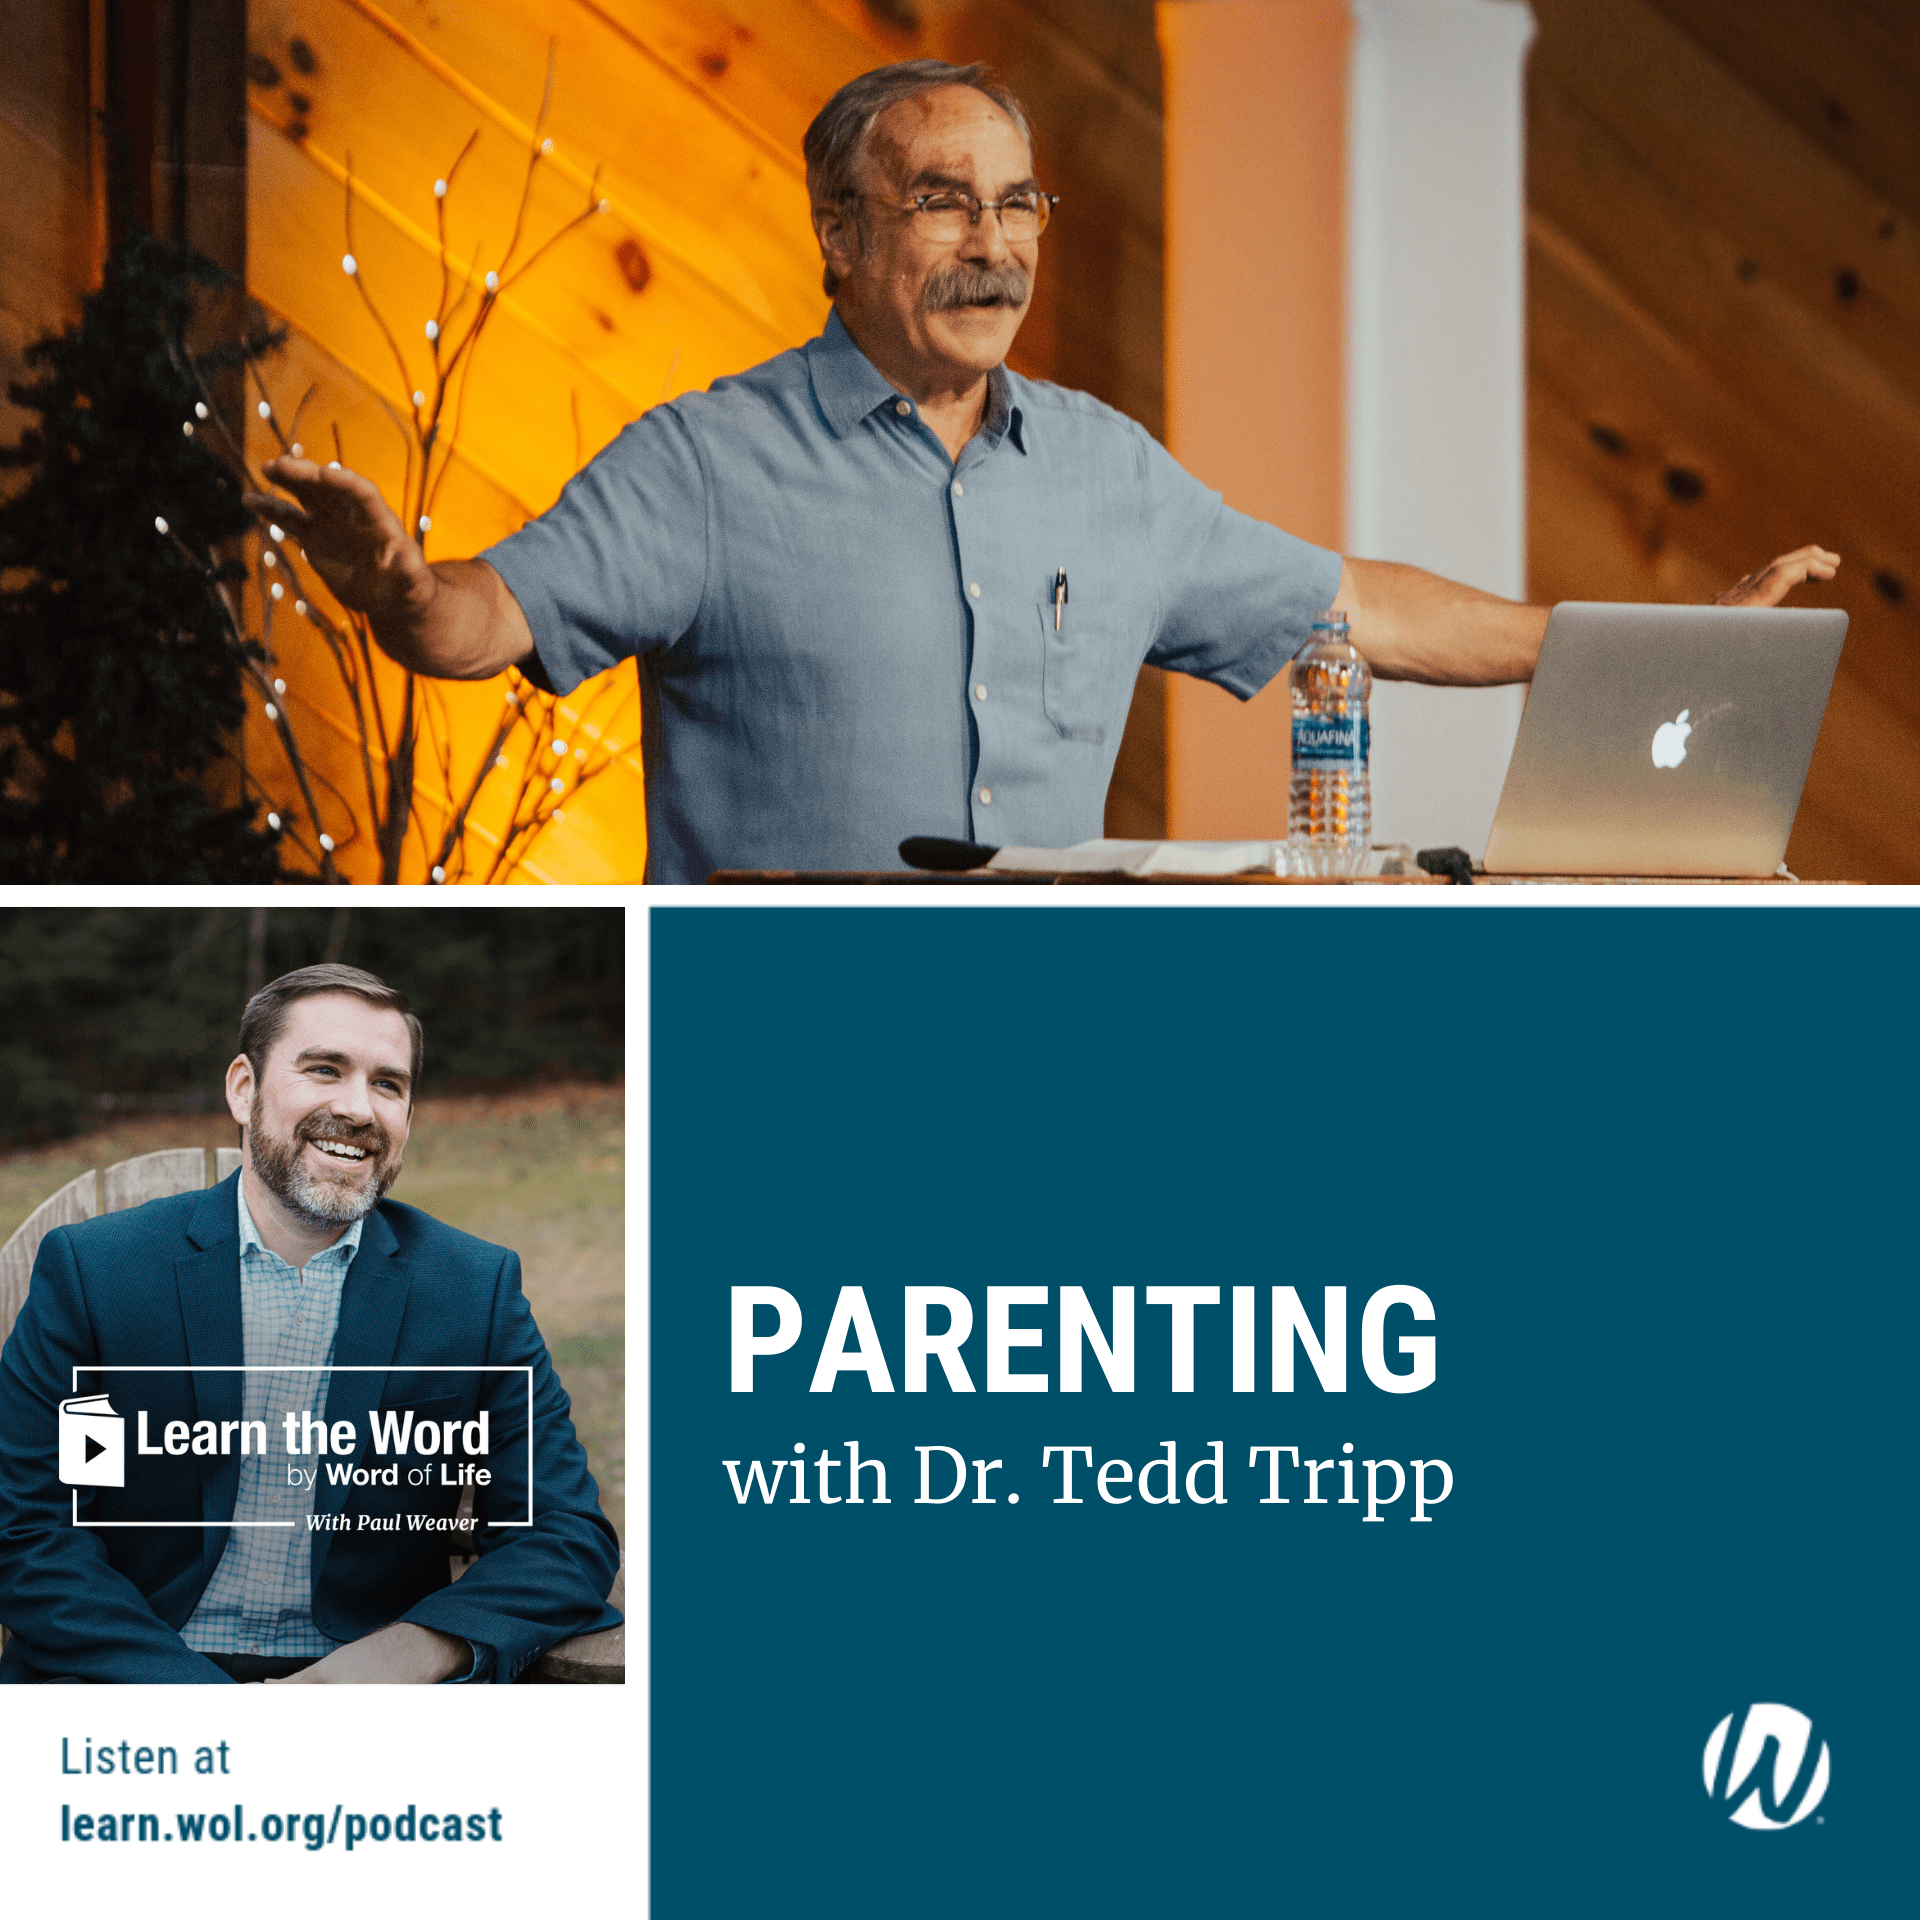 Parenting - with Dr. Tedd Tripp